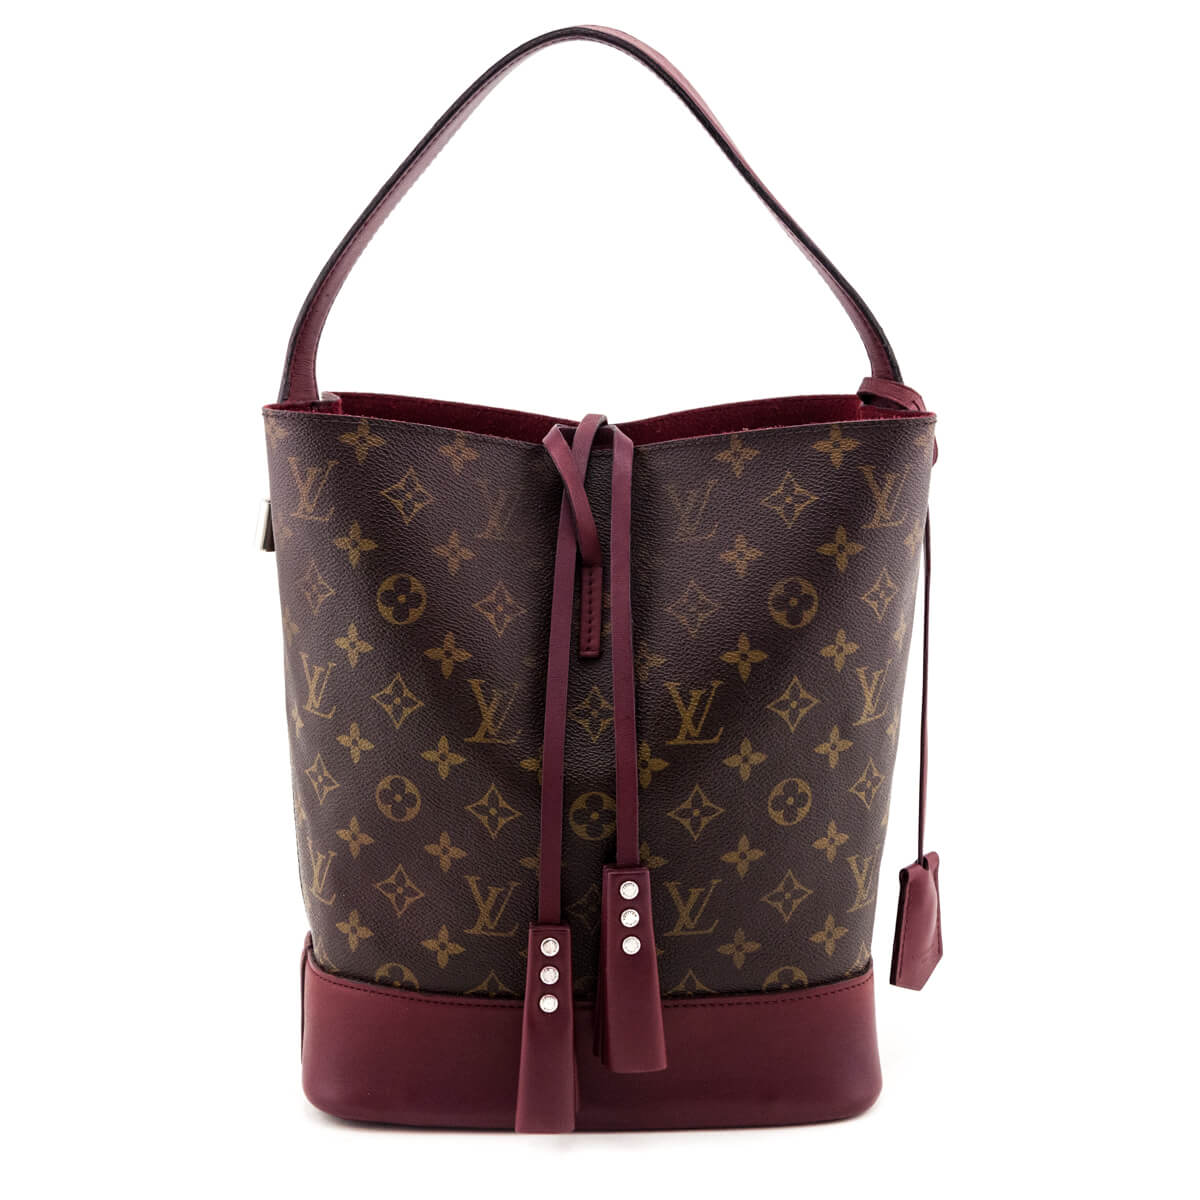 Louis Vuitton - Preowned Designer Clothing & Shoes - Love that Bag